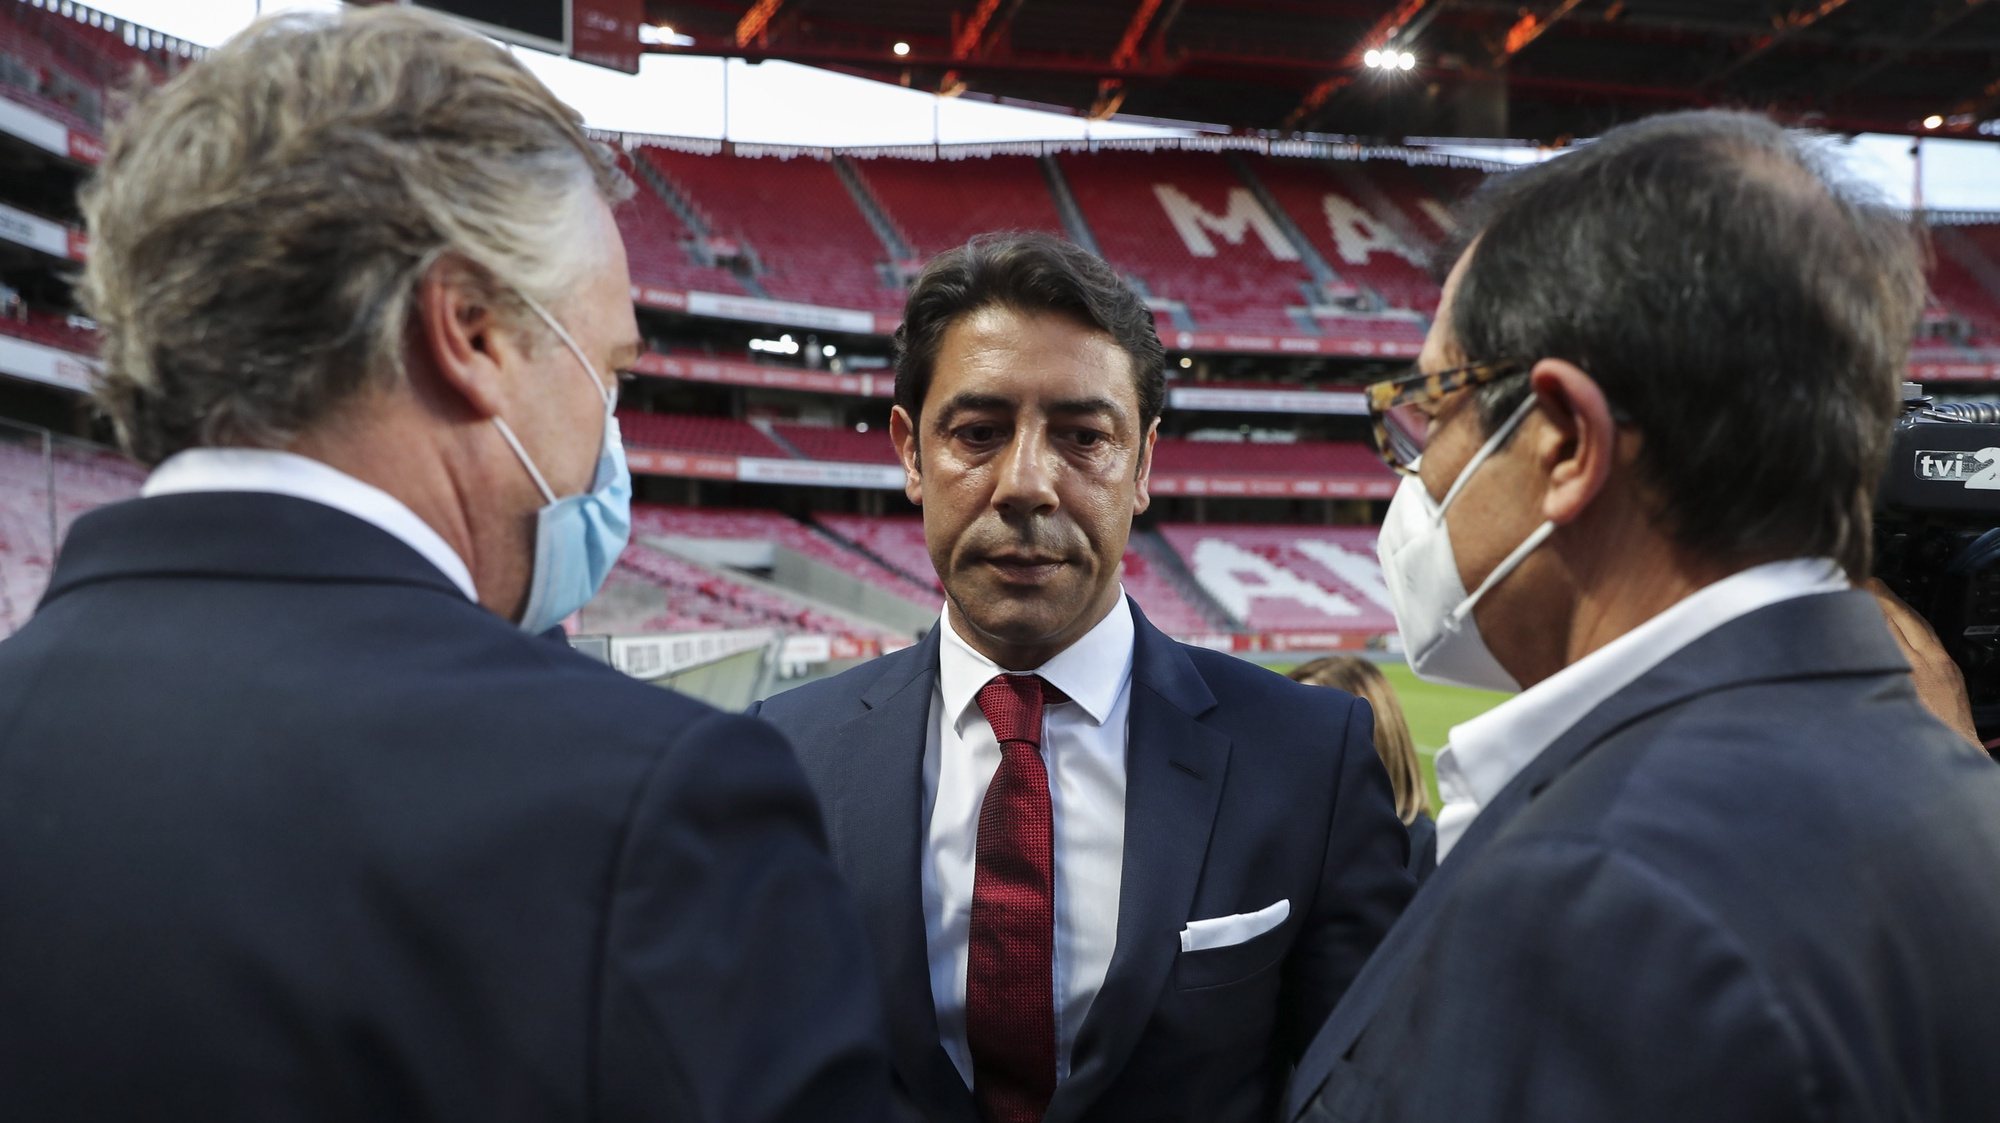 epa09334697 Former Portuguese player Rui Costa (C) is greeted by club officials after being appointed new president of Portuguese soccer club Benfica in Lisbon, Portugal. 09 July 2021. Rui Costa replaced Luis Filipe Vieira, who suspended his duties after he was detained as part of an investigation into alleged tax fraud and money laundering.  EPA/MIGUEL A. LOPES